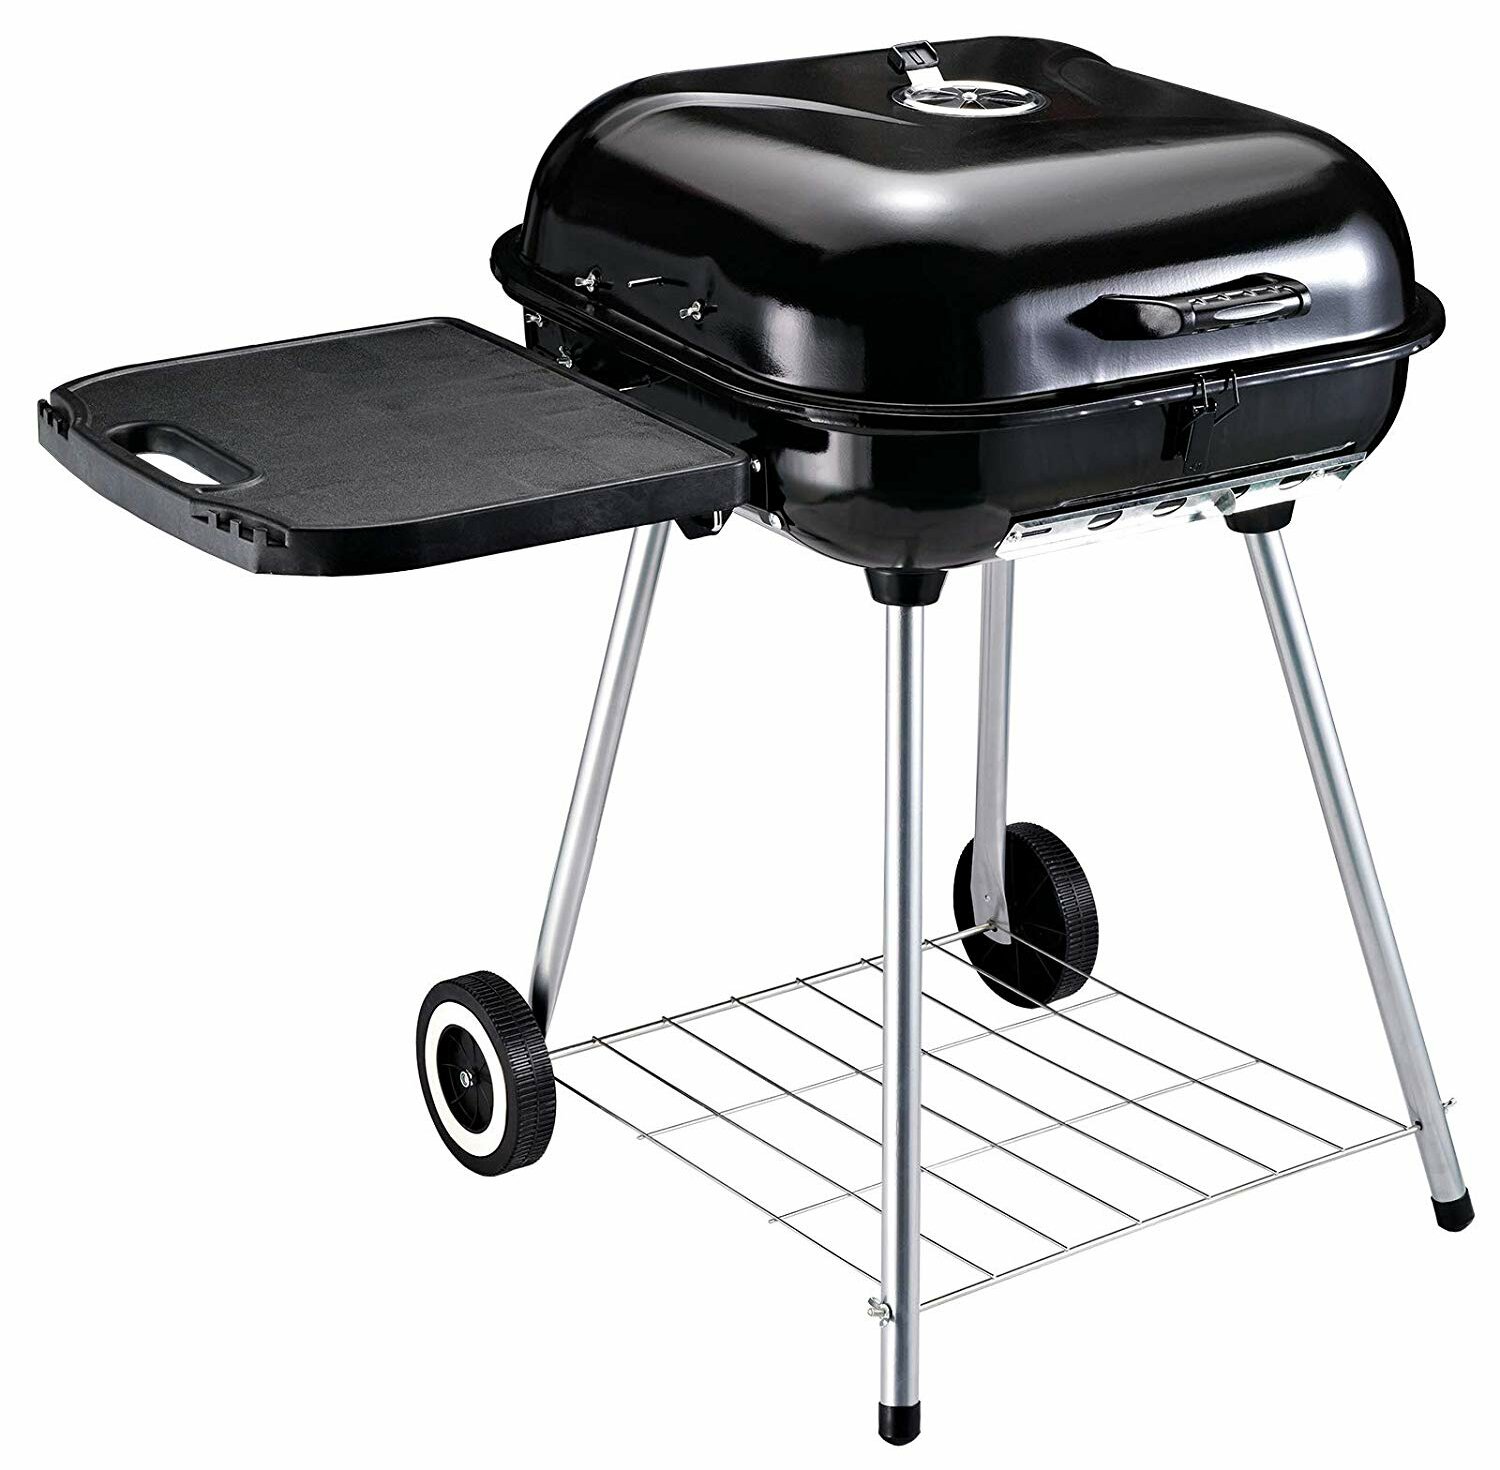 16 INCH ROUND CHARCOAL BARBEQUE BBQ ADJUSTABLE GRILL BARBECUE PORTABLE CAMPING 